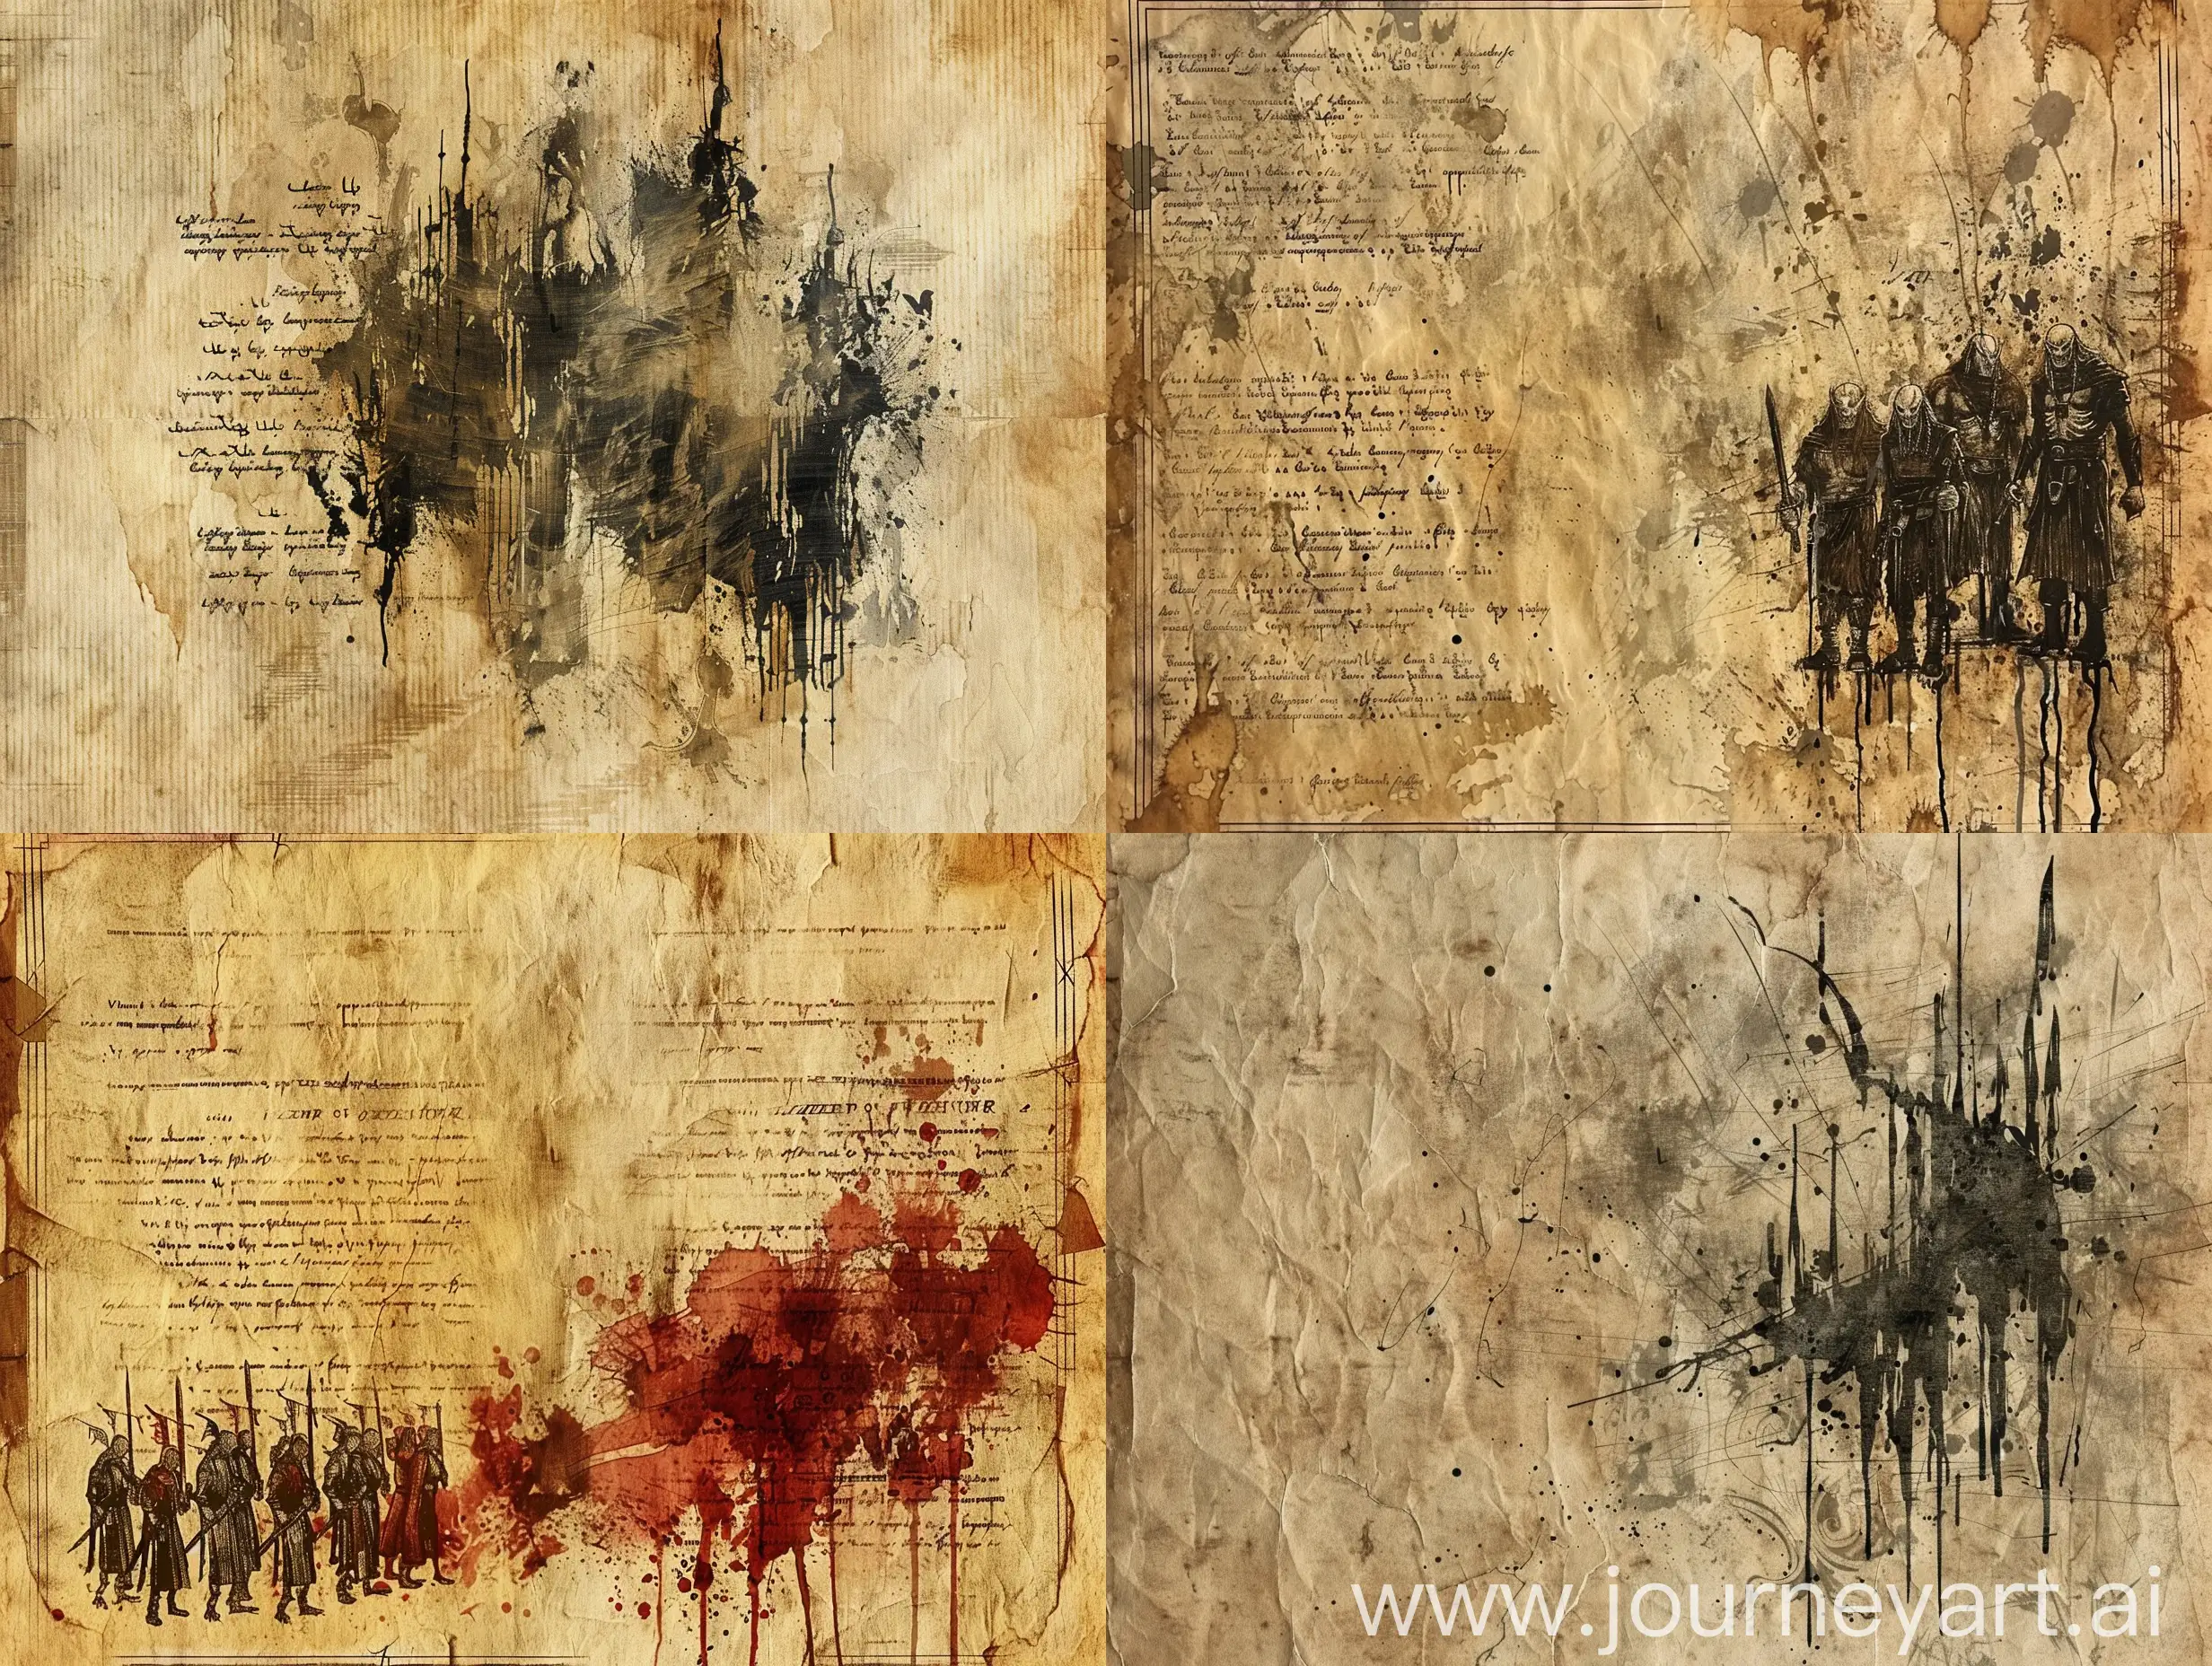 on parchment, on parchment, ink splashes, ink stains, ink smears, faded ink, orcs in lord of the rings moive